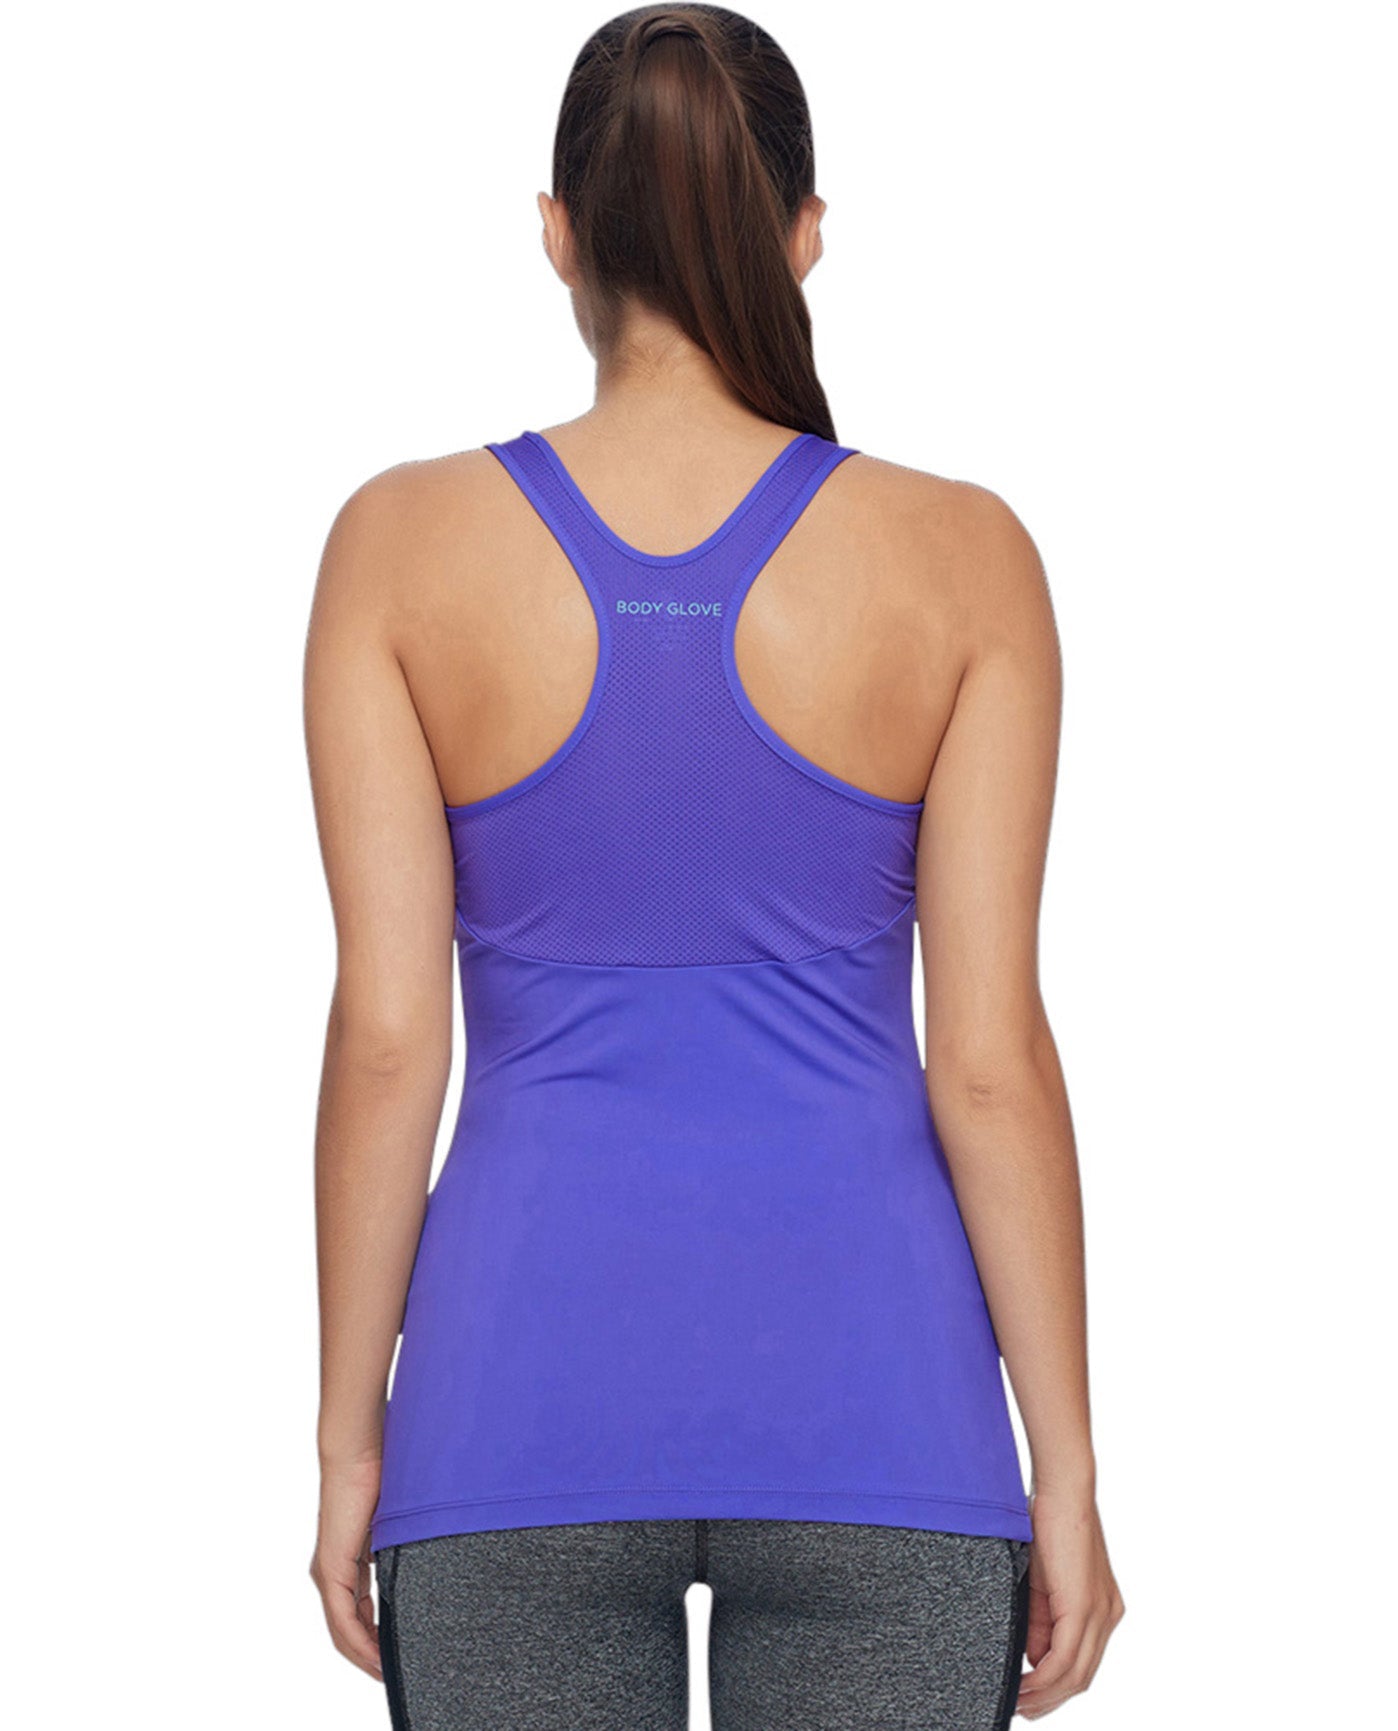 Back View Of Body Glove Sport Pali Relaxed Fit Tank Top | BGS Pali Purple Rain